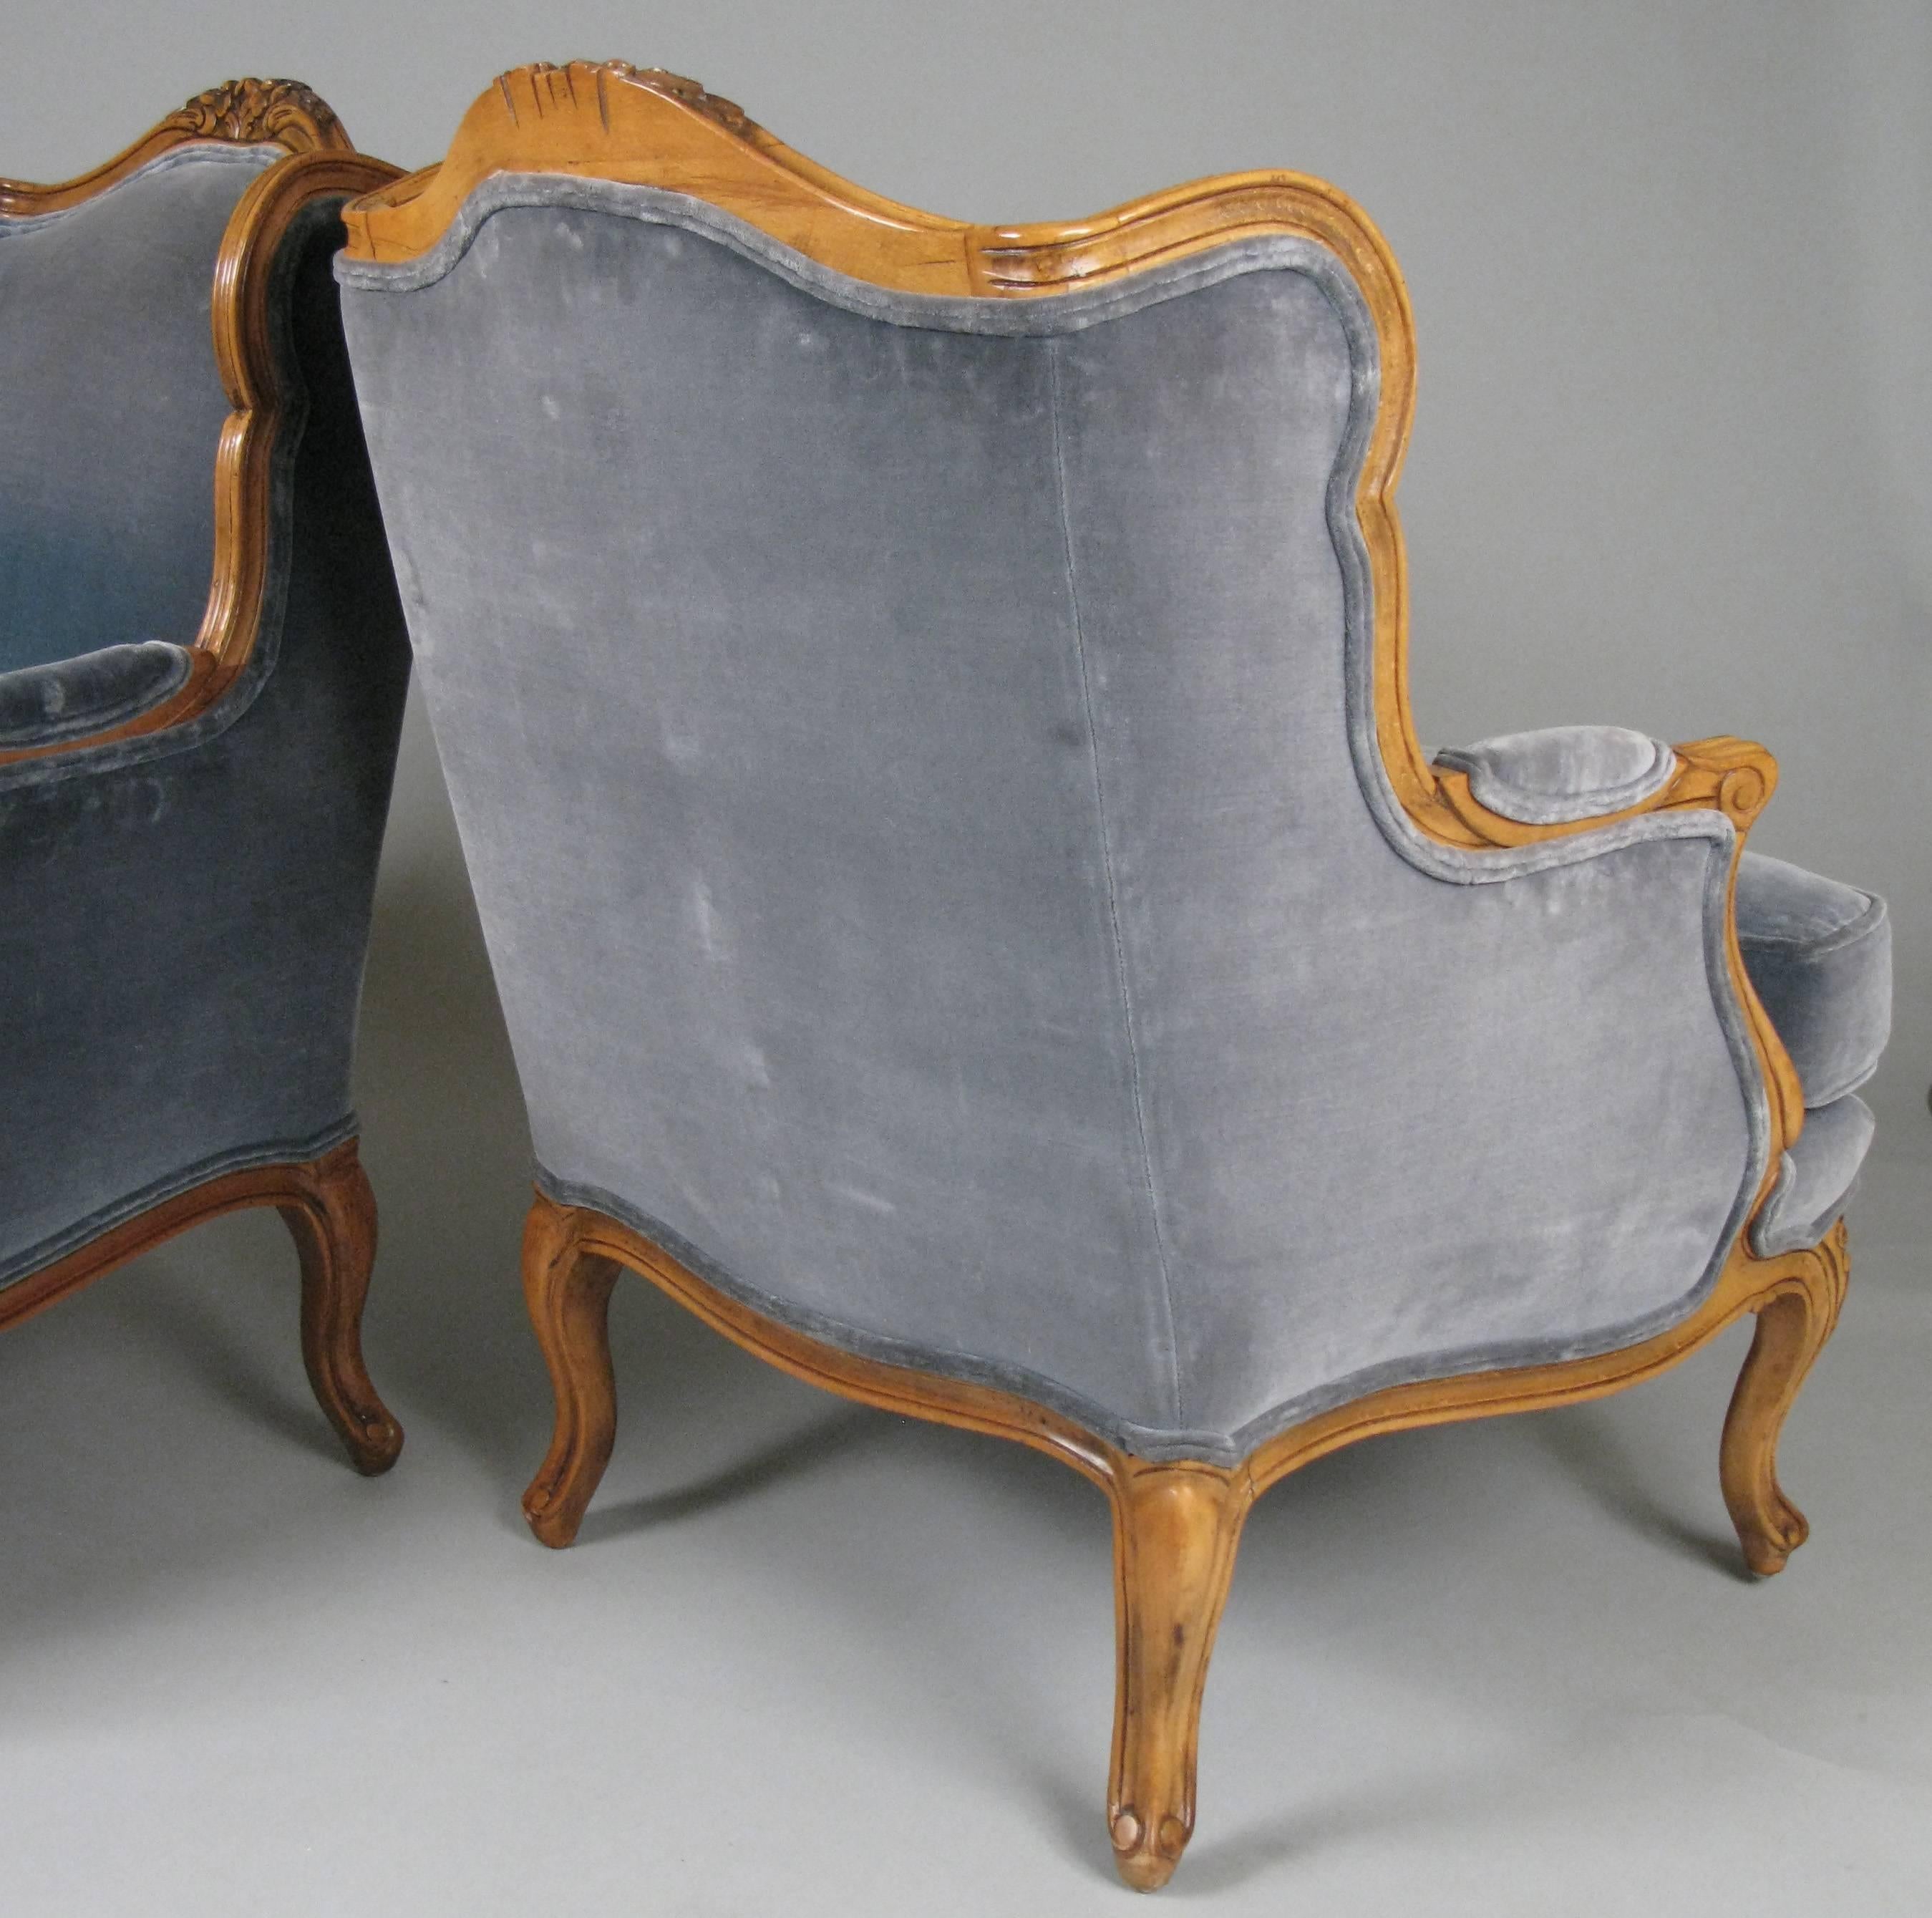 A charming pair of vintage 1950s French style bergère armchairs by Baker, in their original medium blue velvet upholstery and natural fruitwood frames.